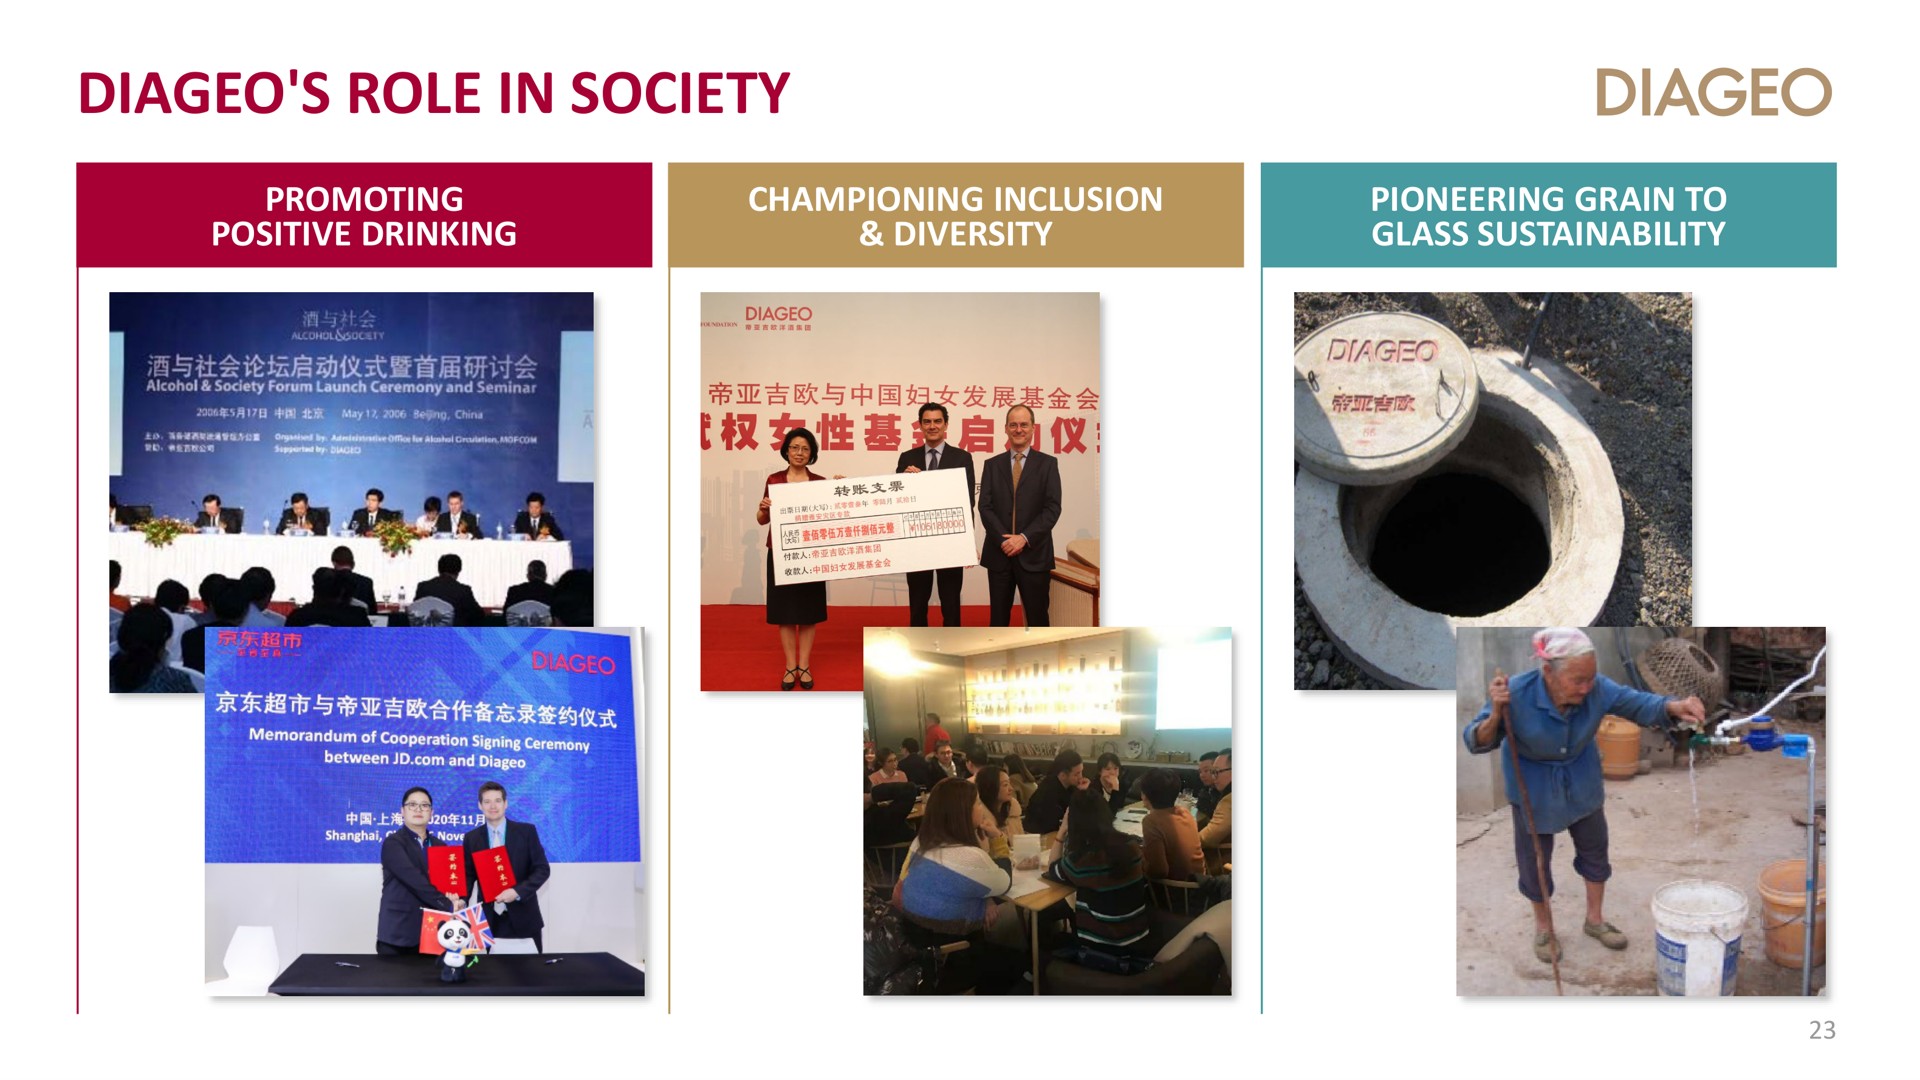 role in society | Diageo